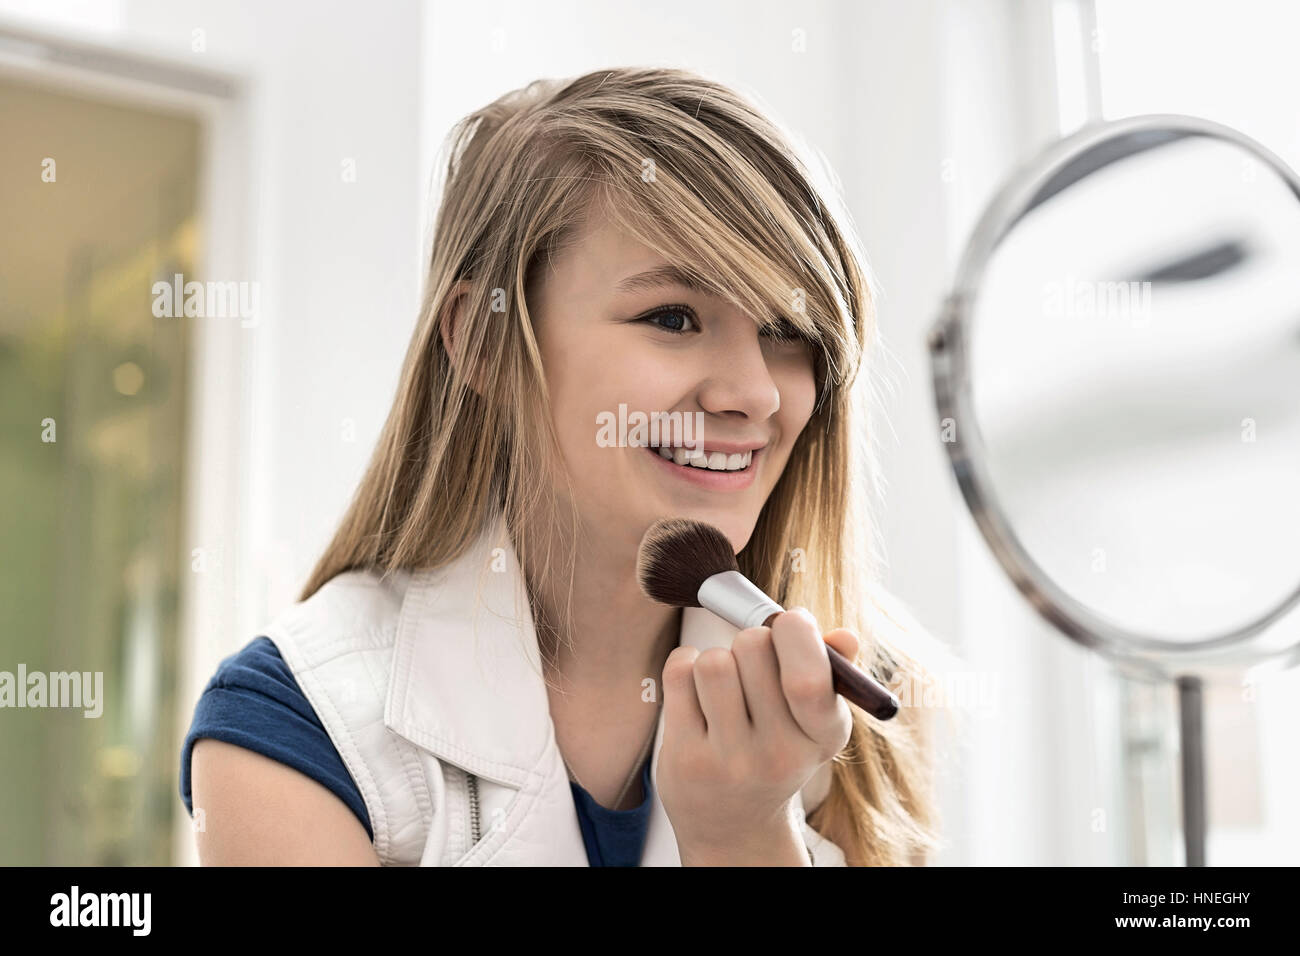 Girl applying makeup in front of mirror at home Stock Photo